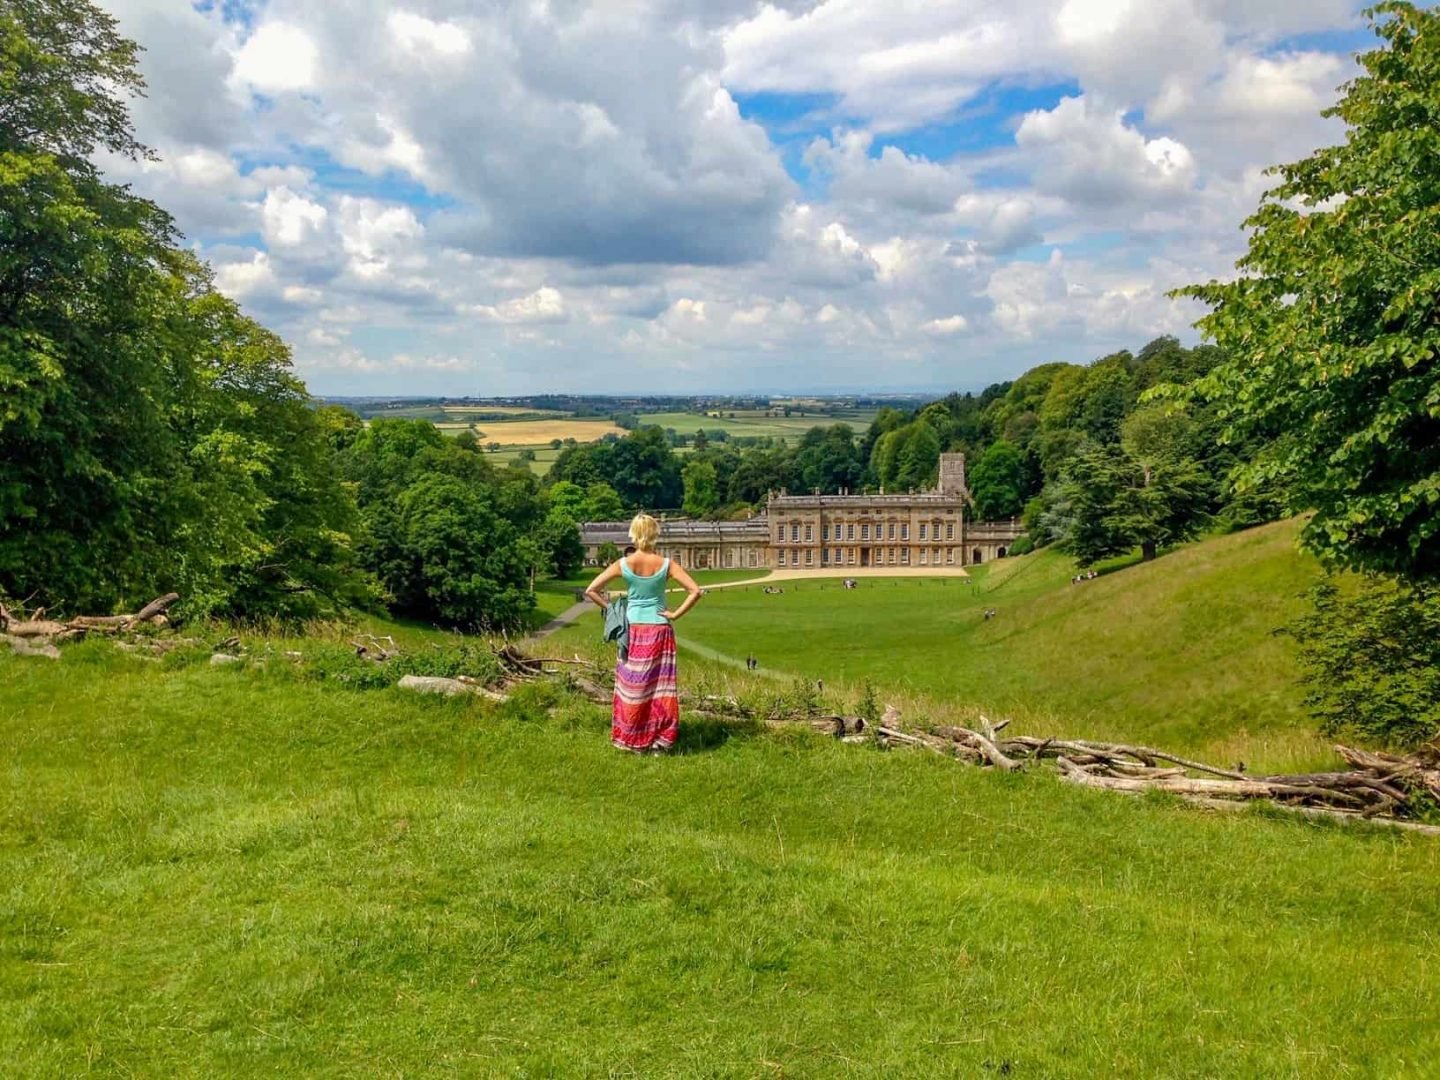 Dyrham Park National Trust mansion and view